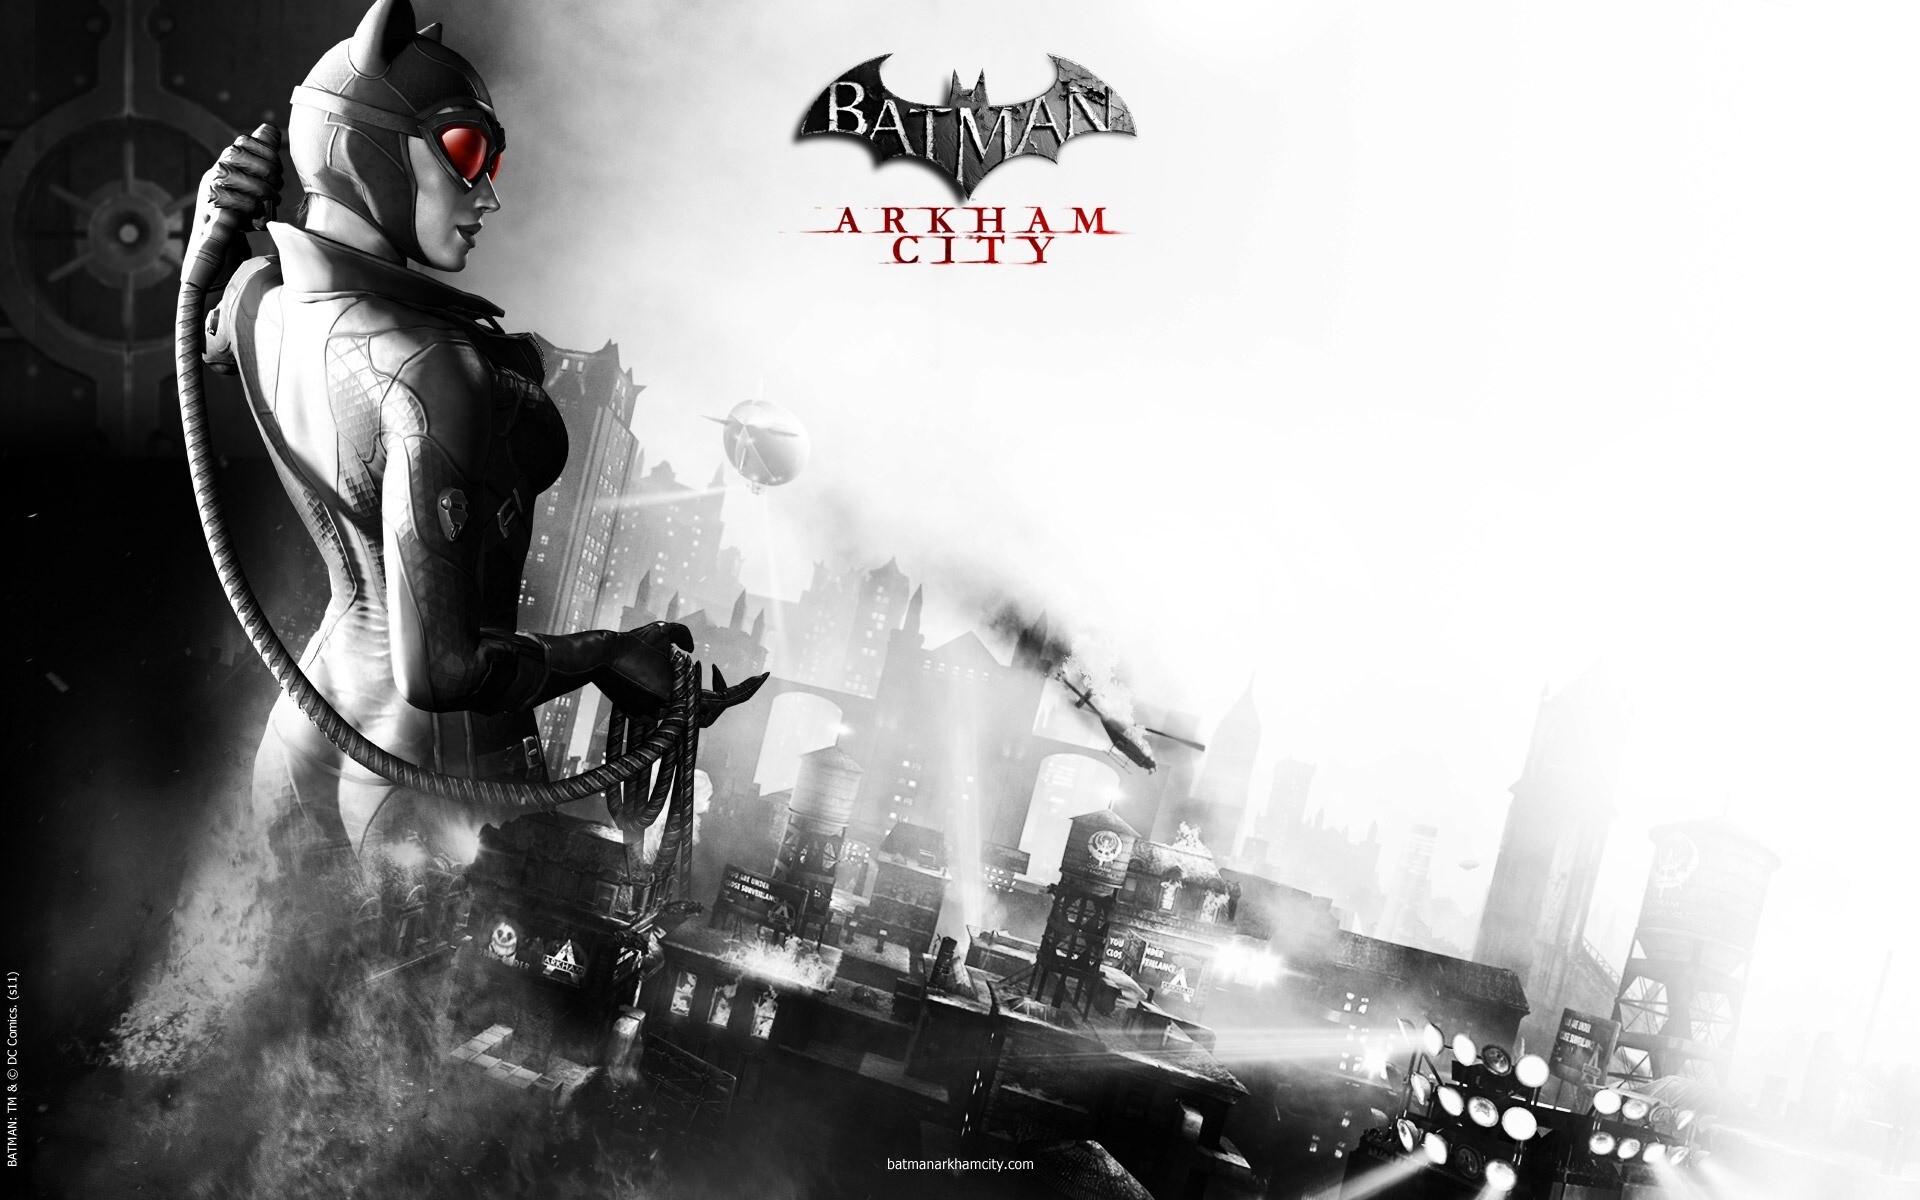 Batman: Arkham City: Catwoman, Selina Kyle, An open world action video game. 1920x1200 HD Background.